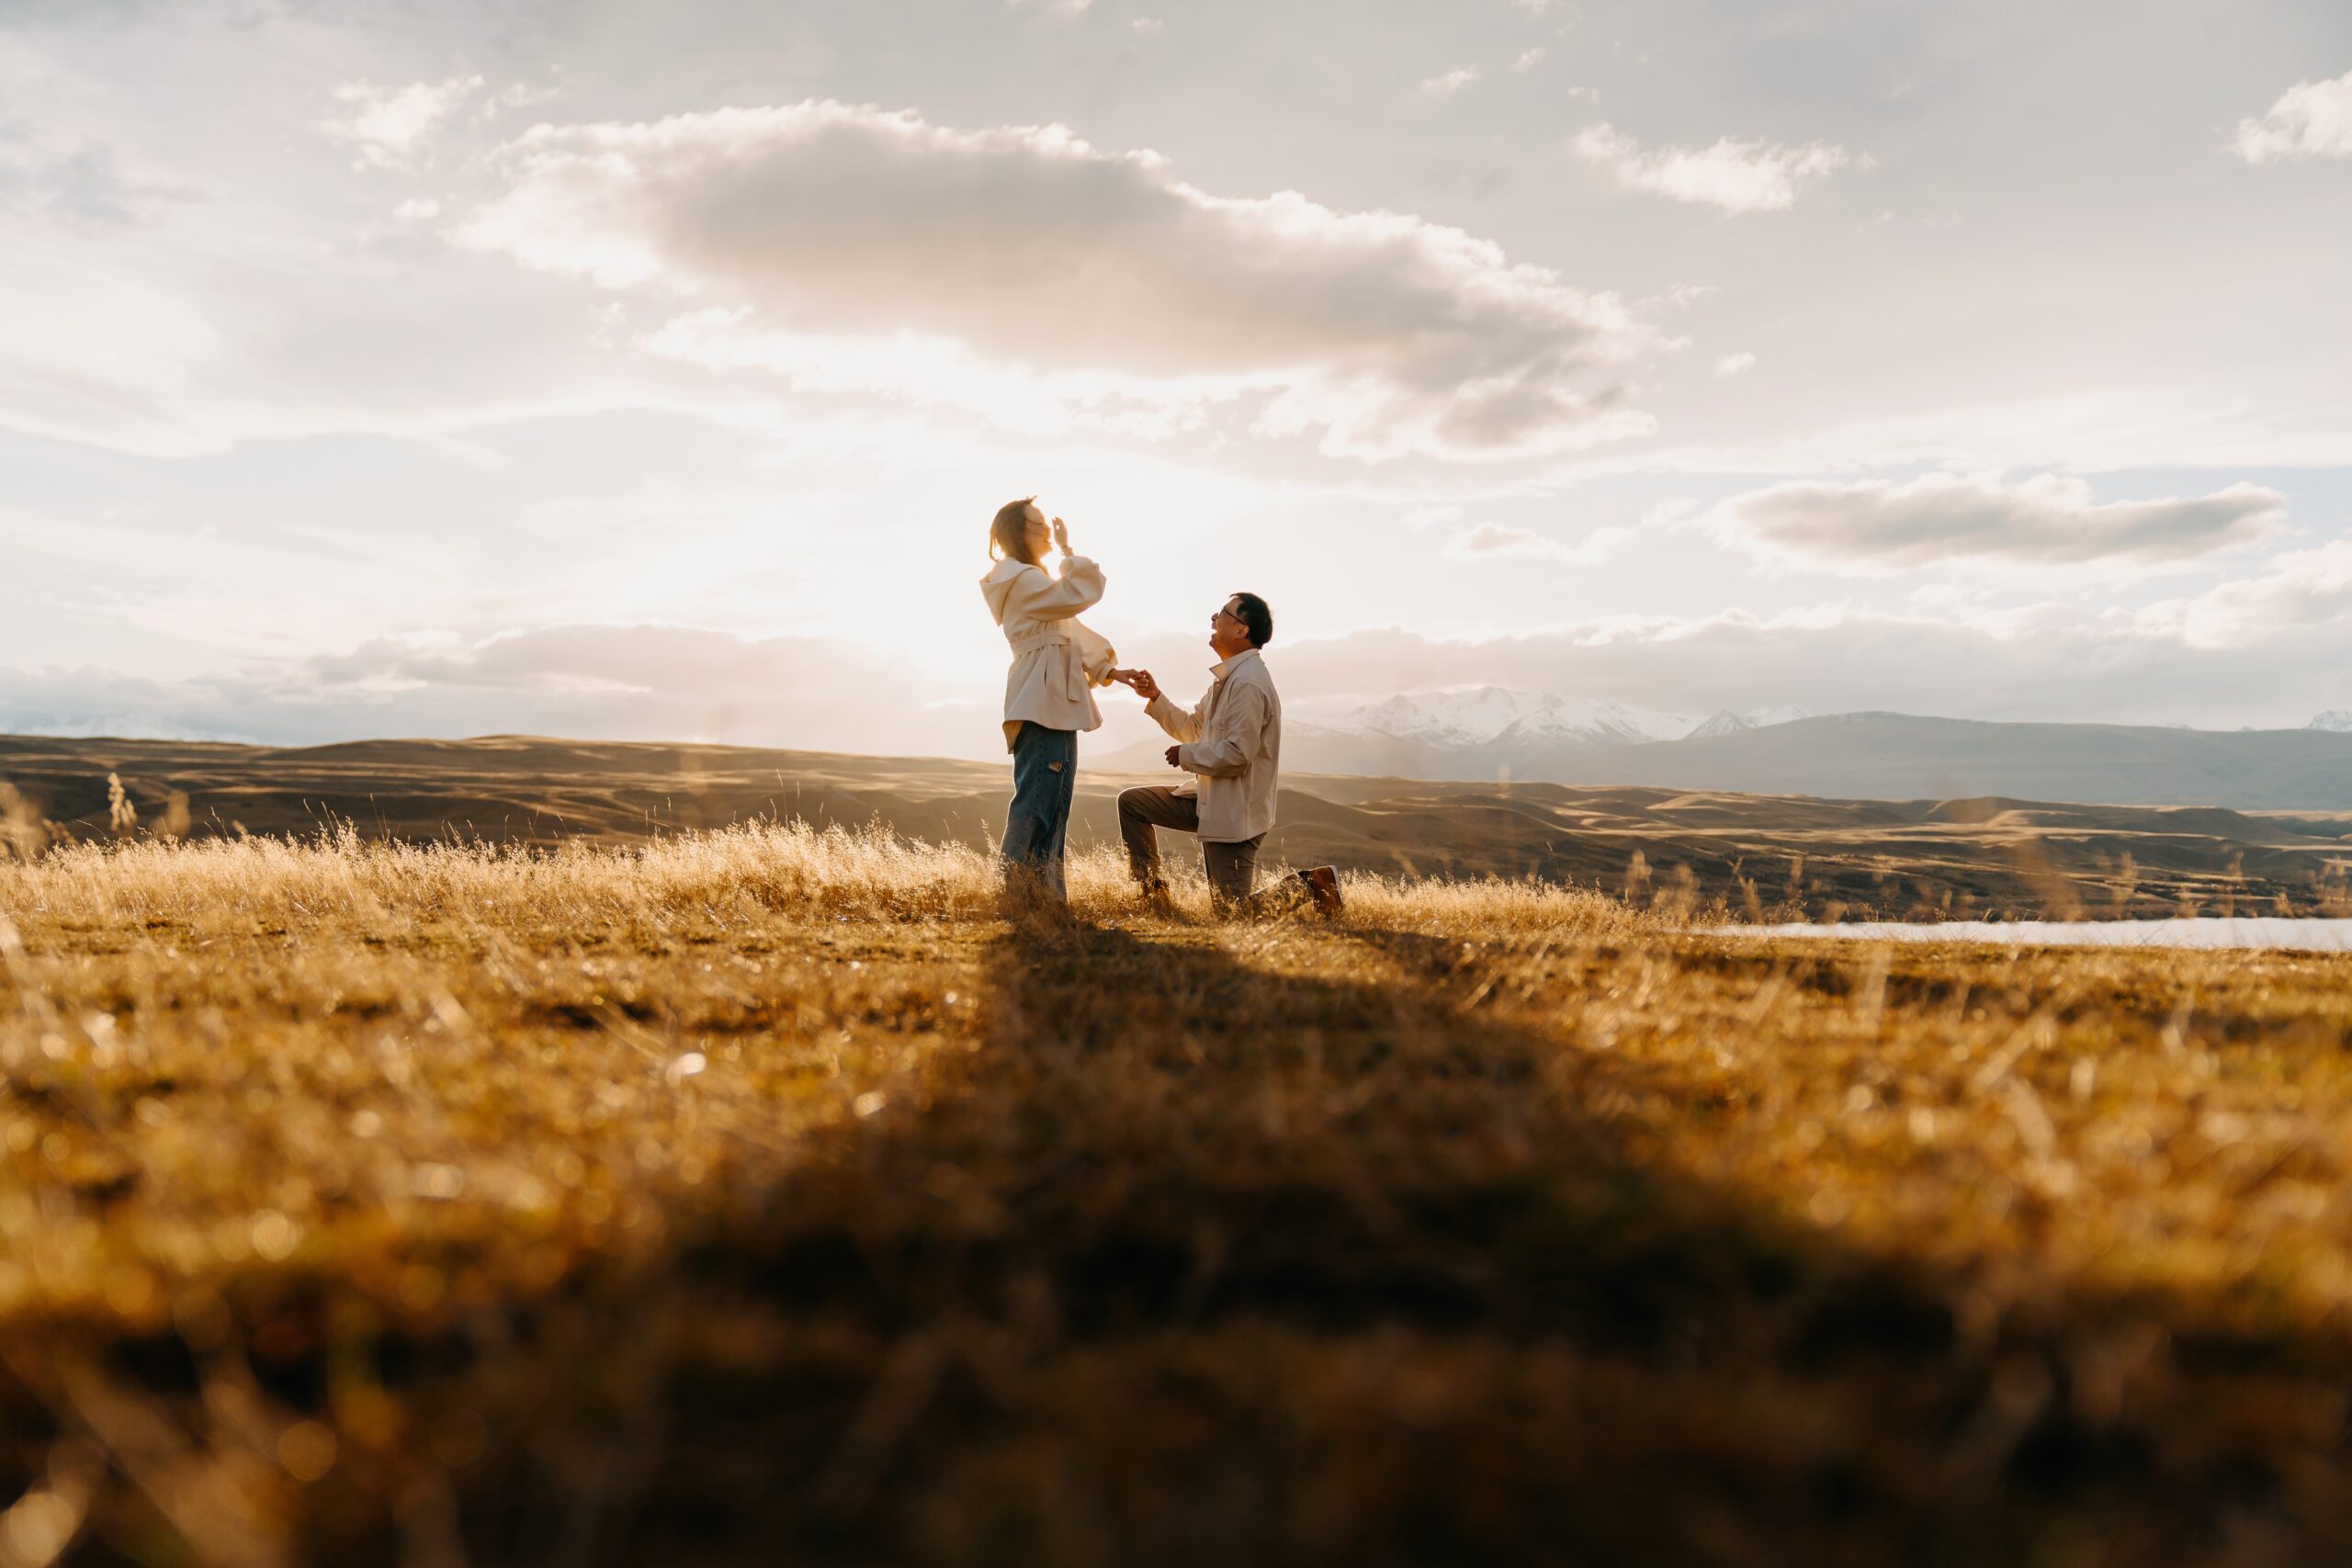 Surprise Proposal during sunset at Tekapo, New Zealand photographed by Tinted Photography